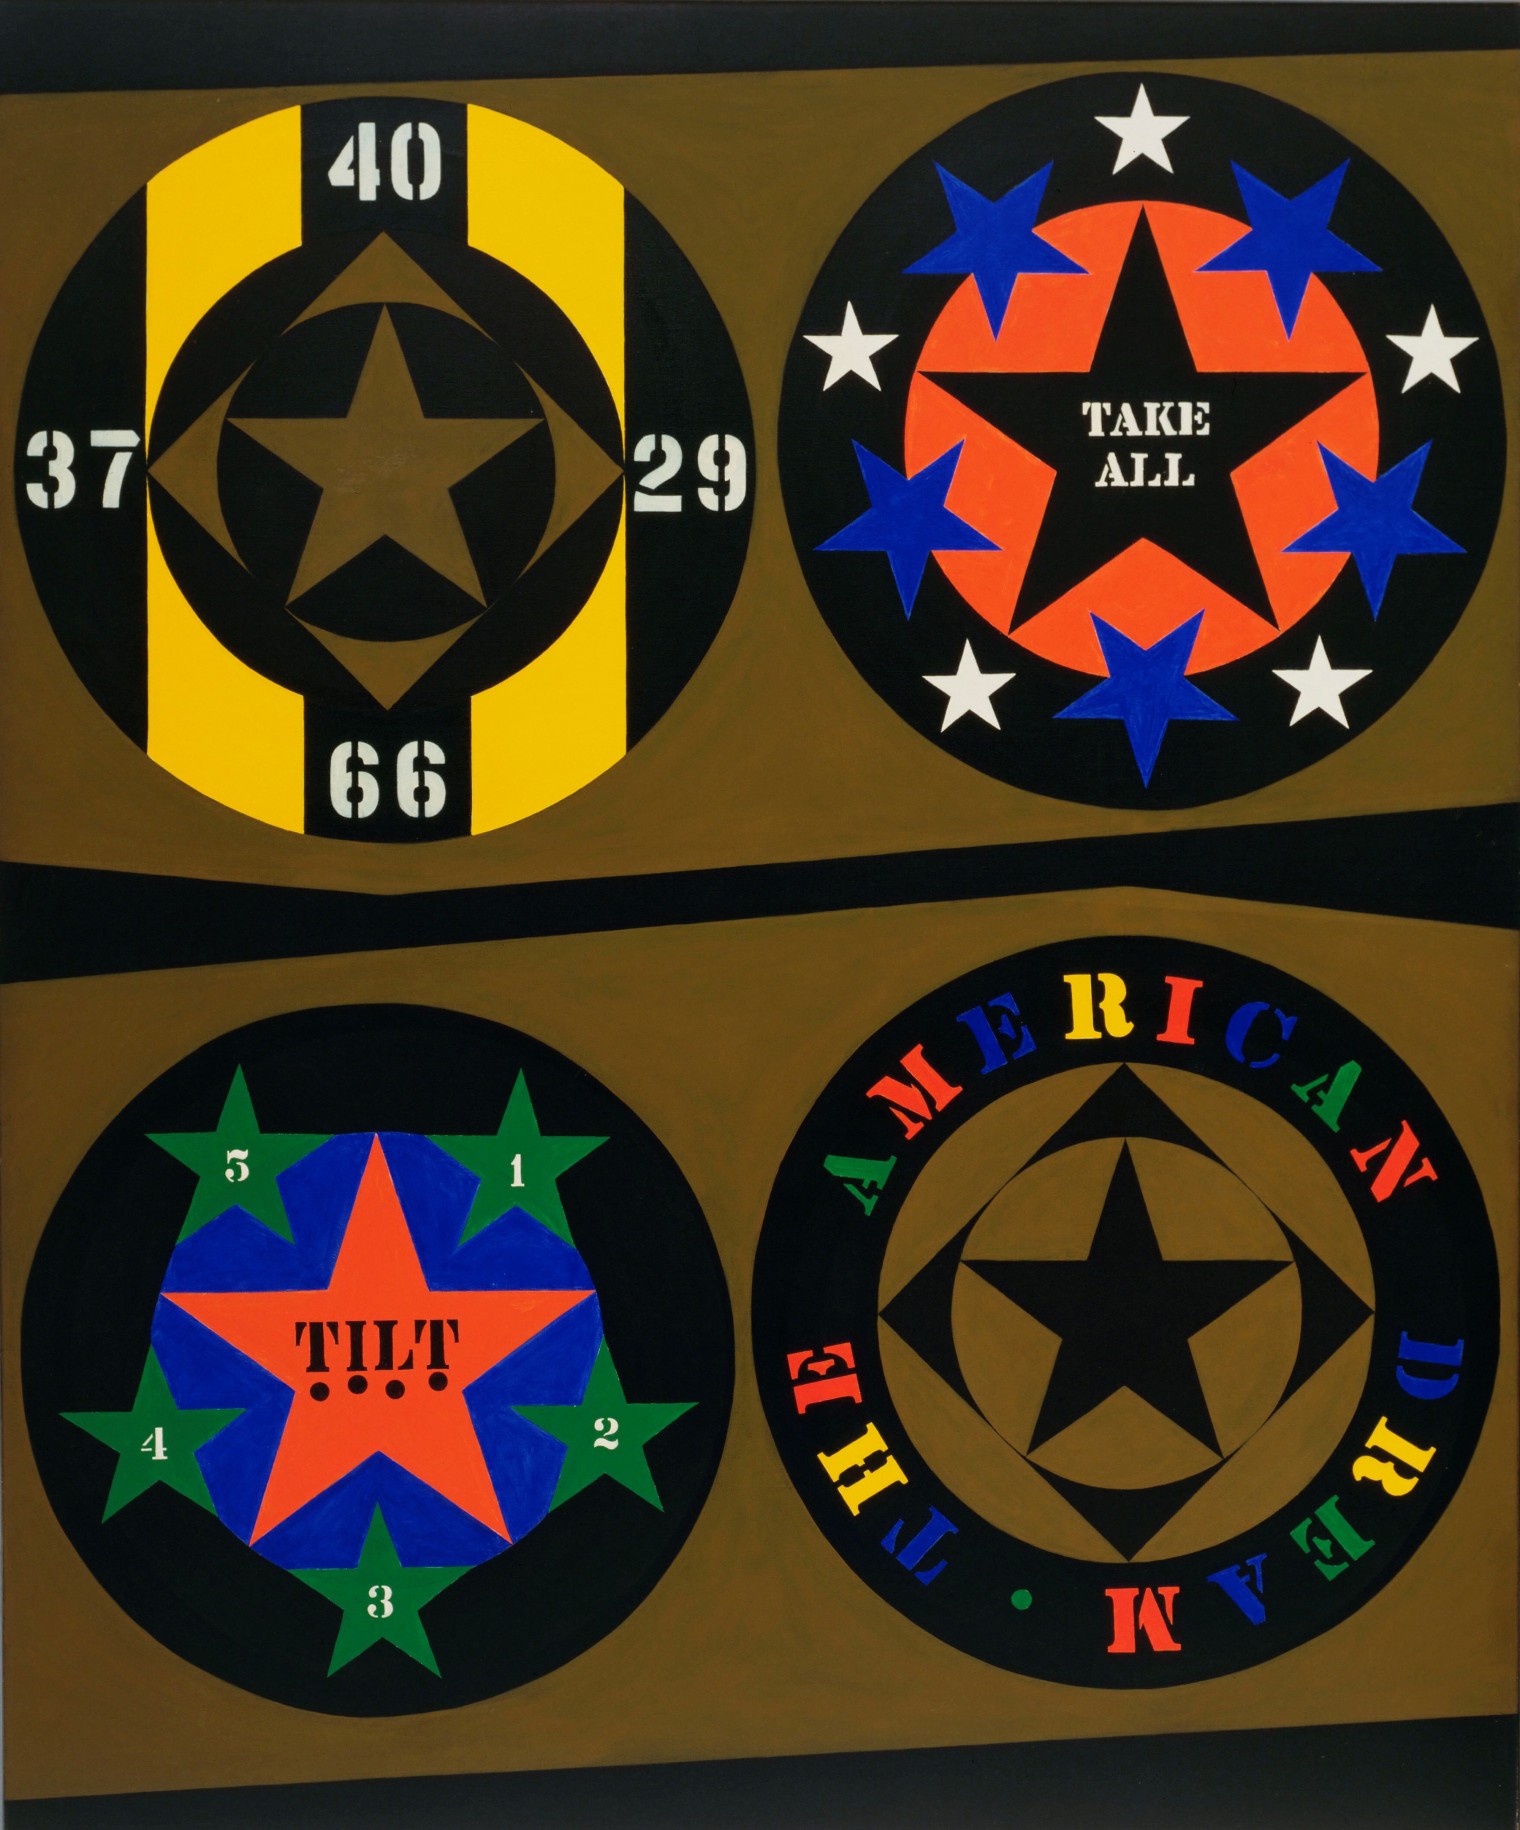 A 72 by 60 inch primarily black and brown painting with two rows of two orbs, each containing a star, as well as references to major American highways and pinball machines. The work's title, &quot;The American Dream,&quot; appears in multicolored stenciled letters in a ring around the lower right hand orb